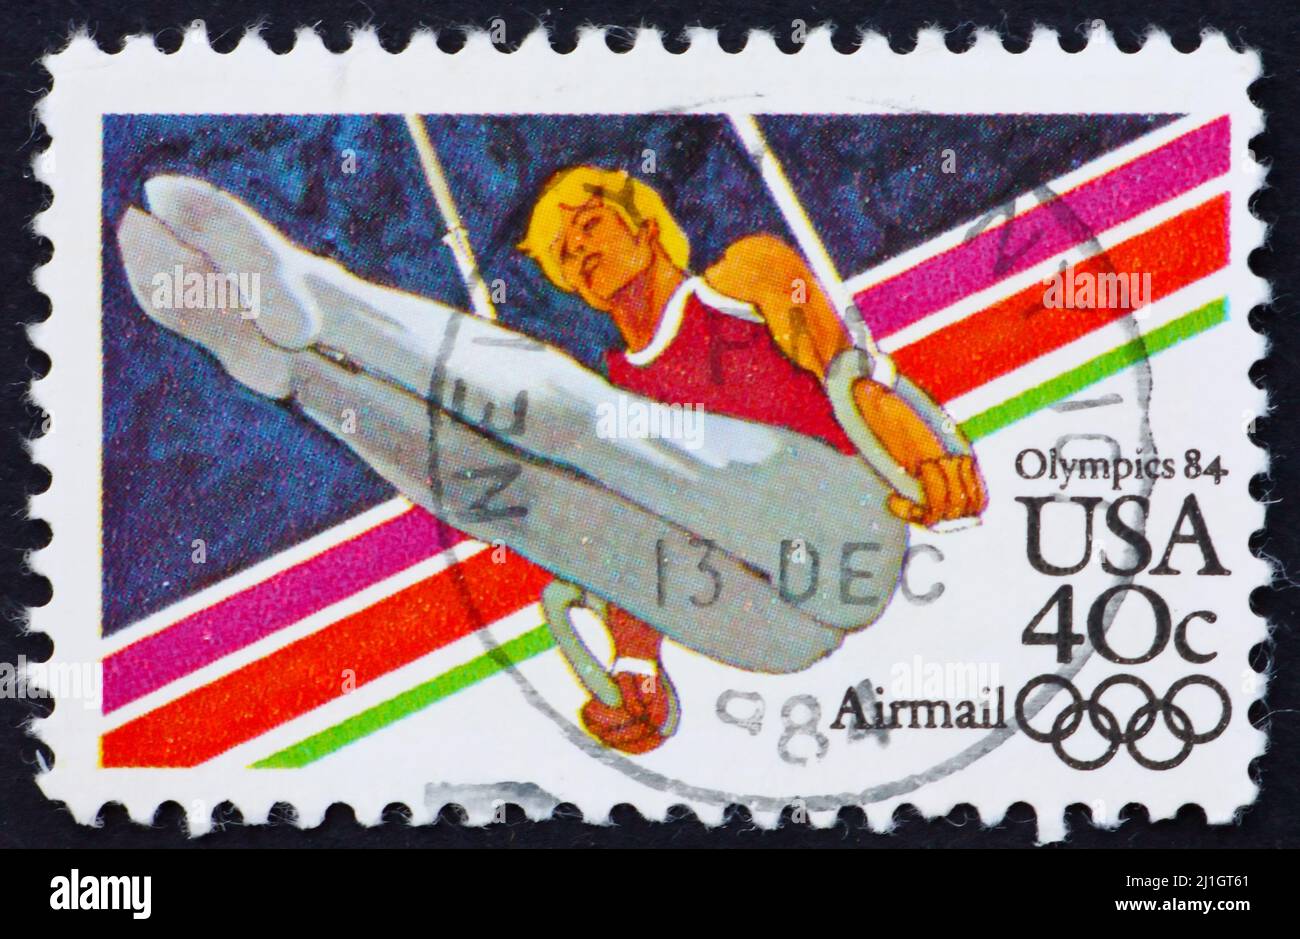 UNITED STATES OF AMERICA - CIRCA 1983: a stamp printed in the United States of America shows Gymnast, Olympic Games 1984, Los Angeles, circa 1983 Stock Photo